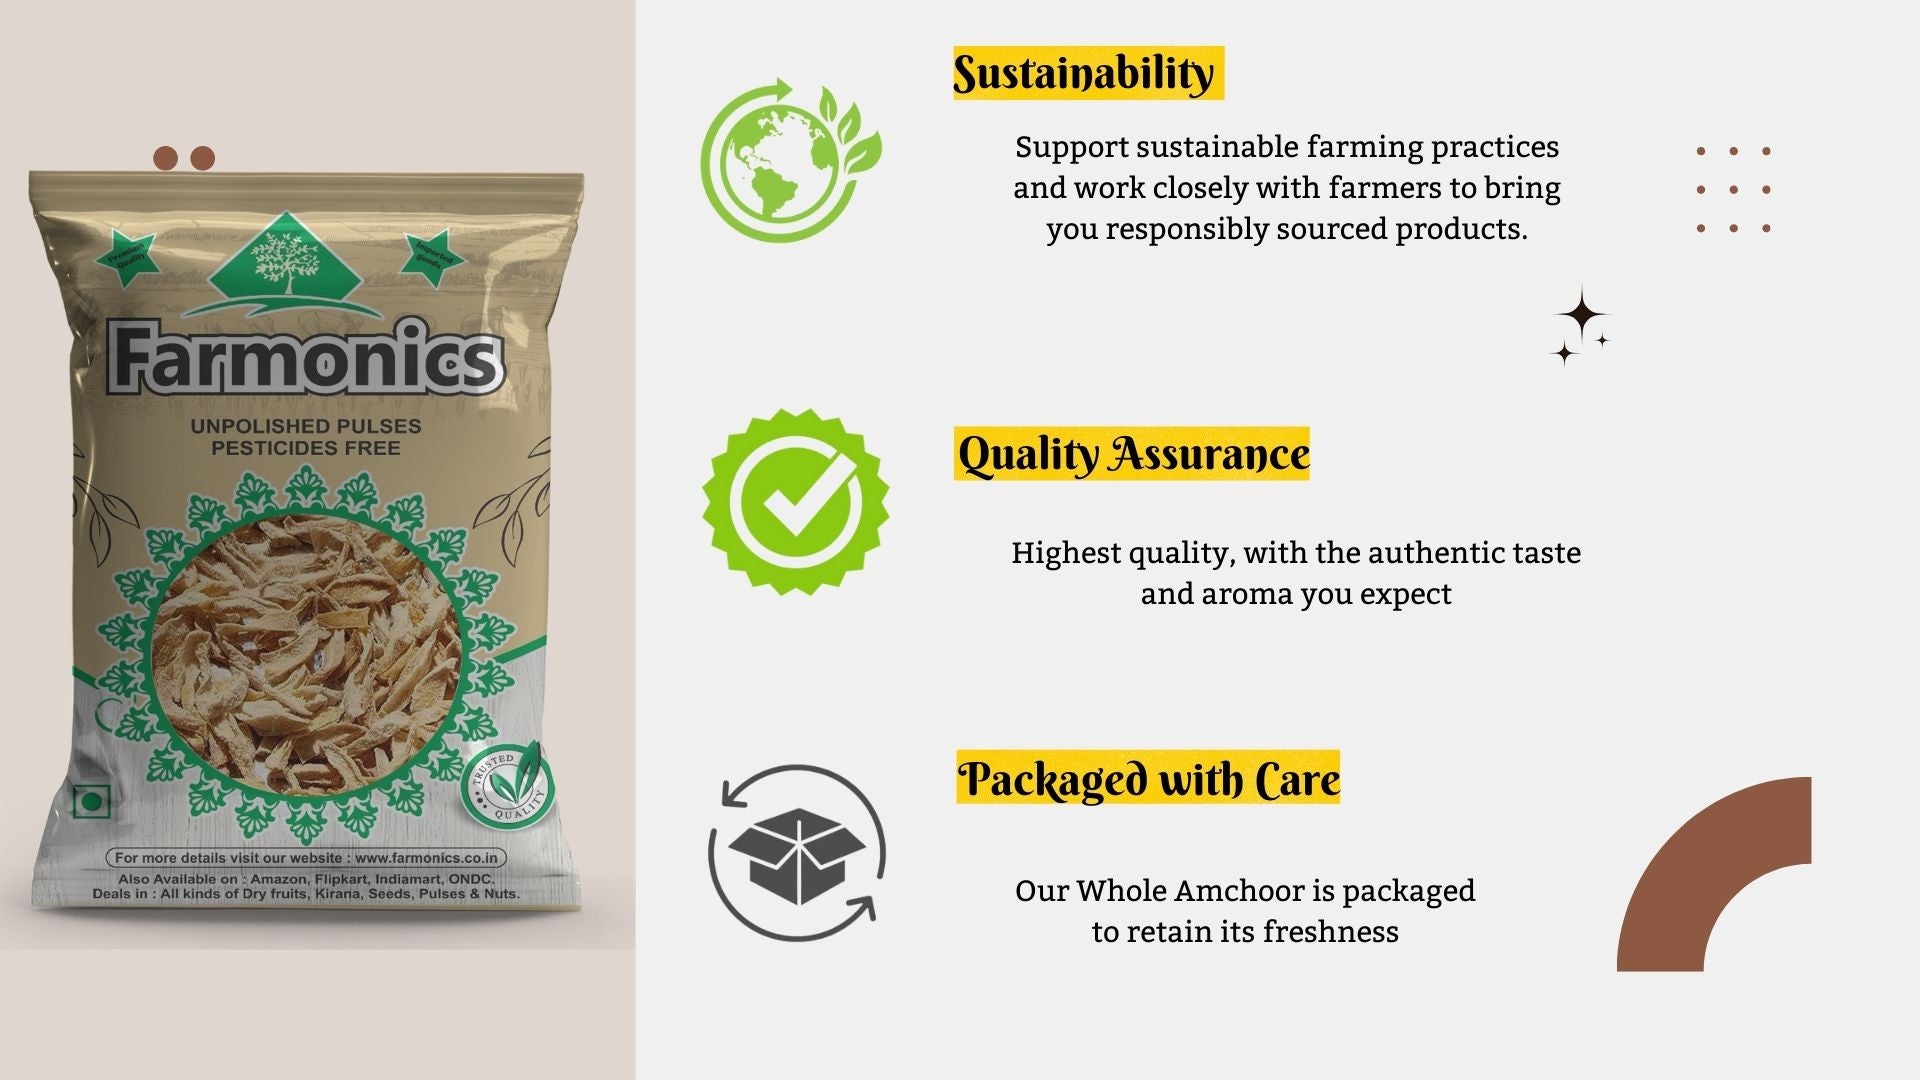 reasons why you should use Framonics amchoor sabut because of its sustaniability, quality assurance and packed with care